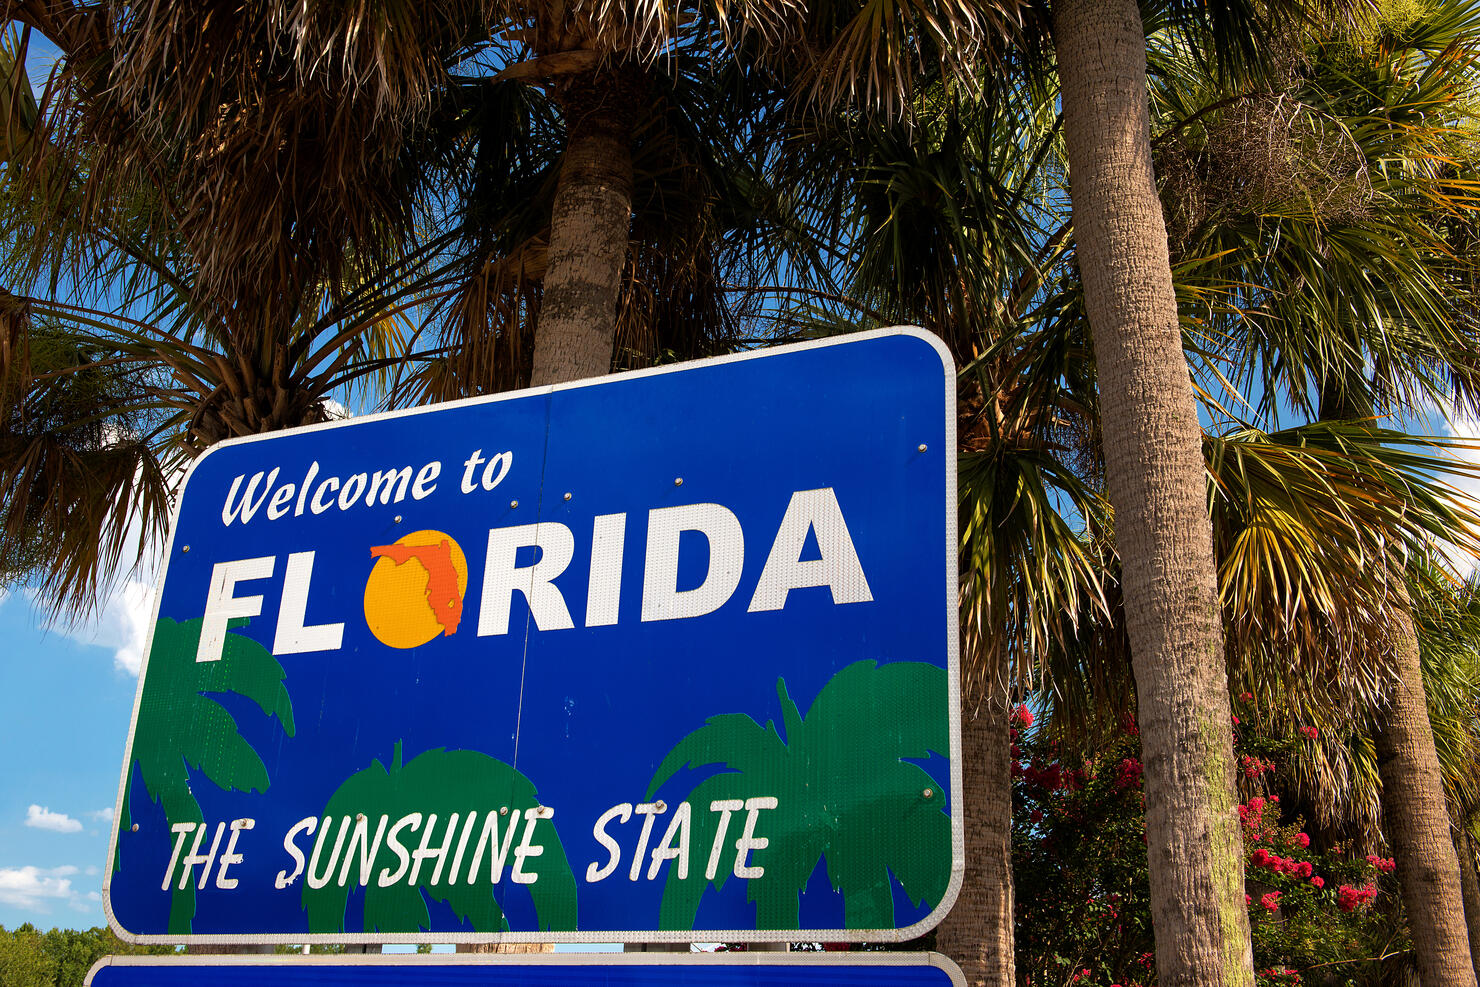 Welcome to Florida sign with palm trees in background